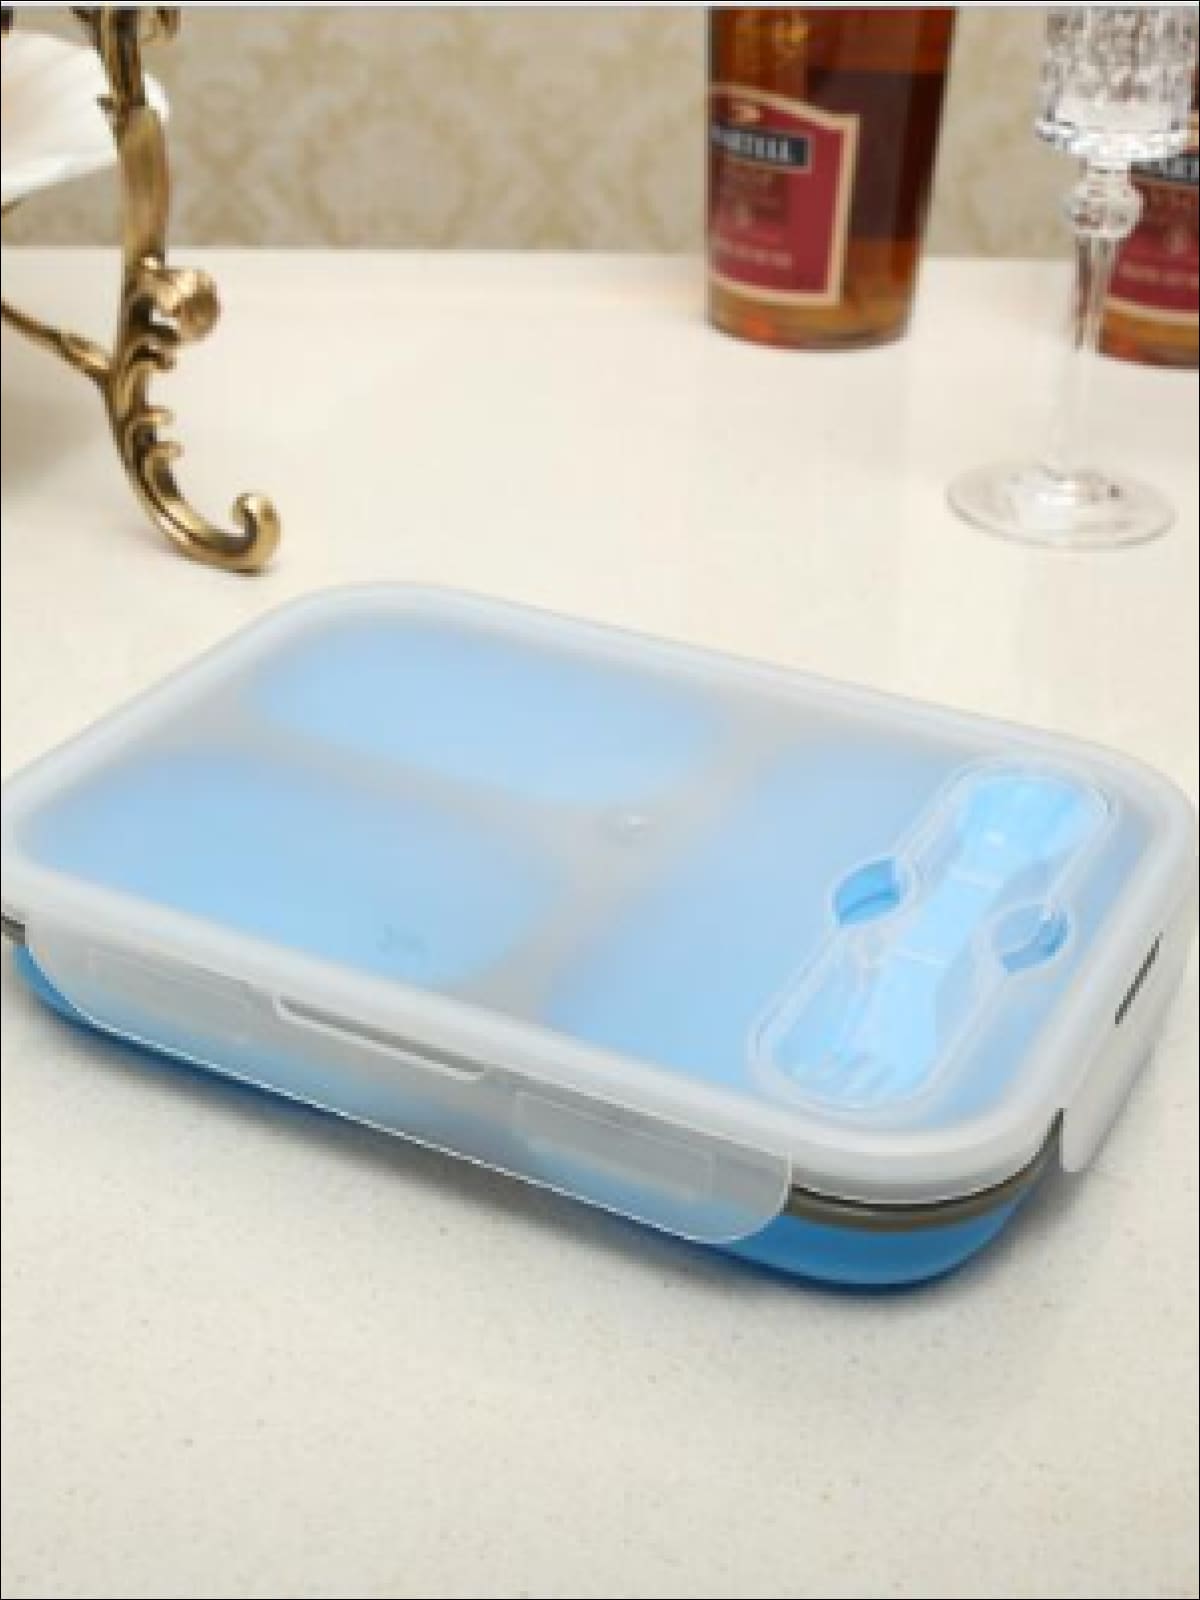 Large Lunch Bento Box Container (3 colors)